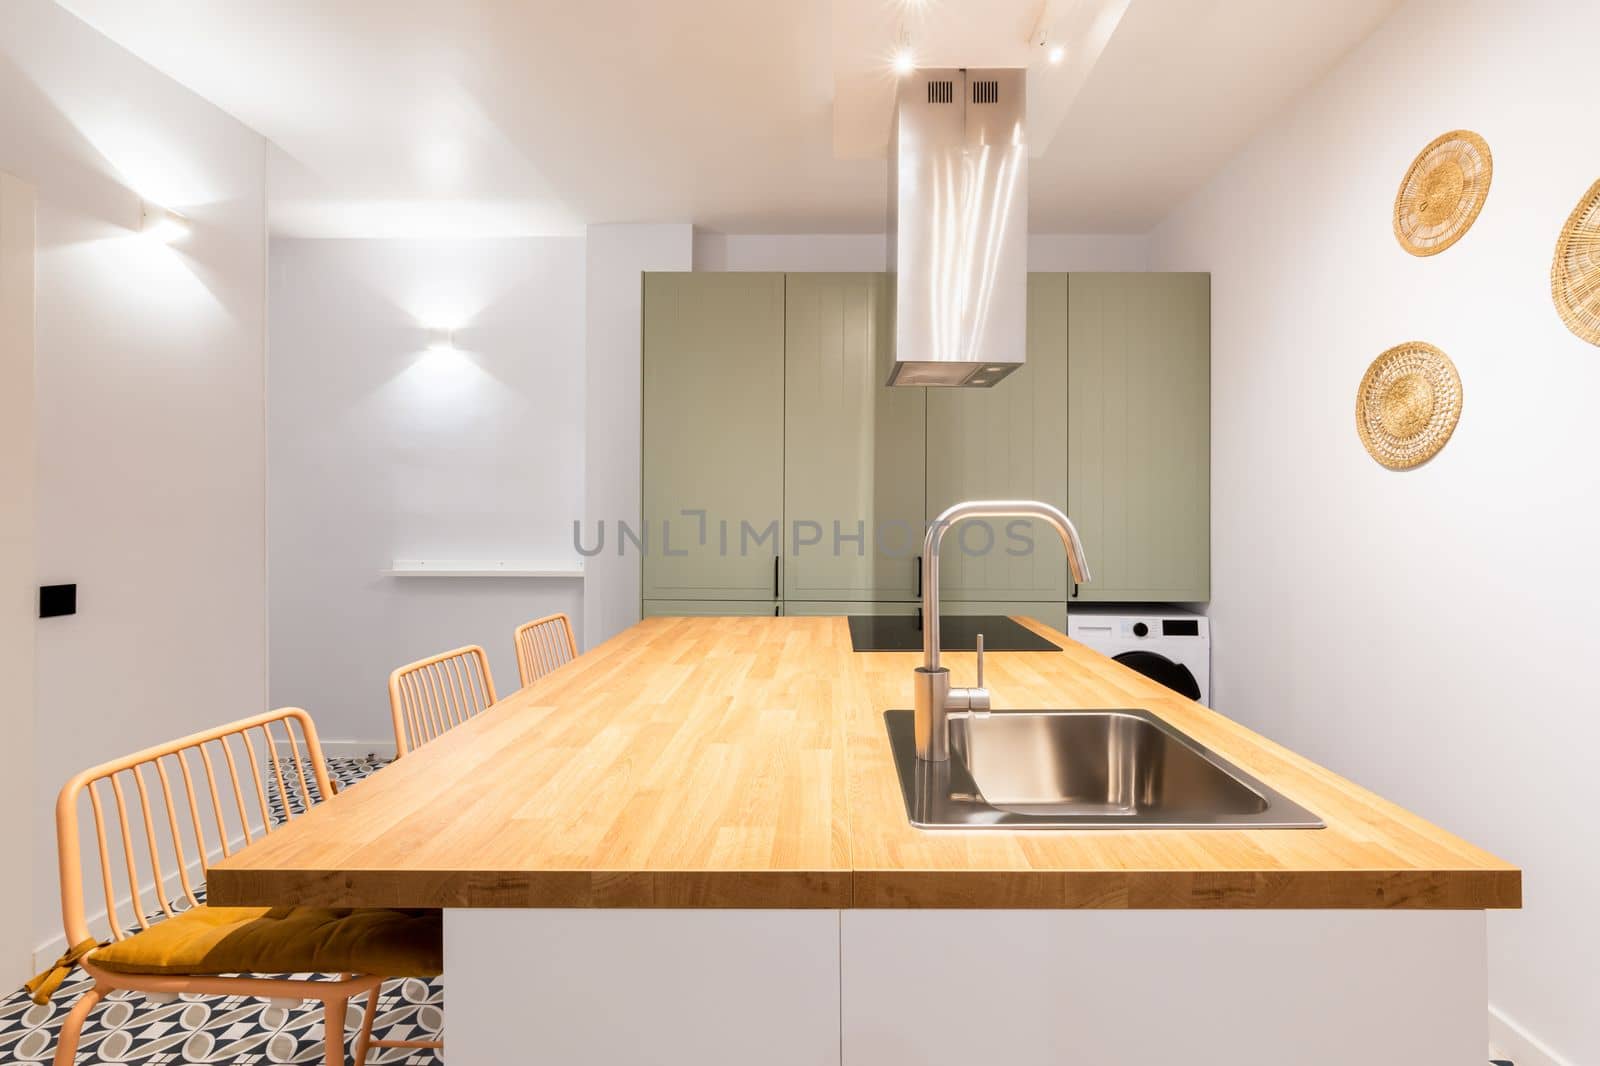 Designer kitchen with bright lighting from wall lamps. Table with sink and faucet in chromed metal. Above the electric stove, system for purifying the air from odors during cooking. by apavlin